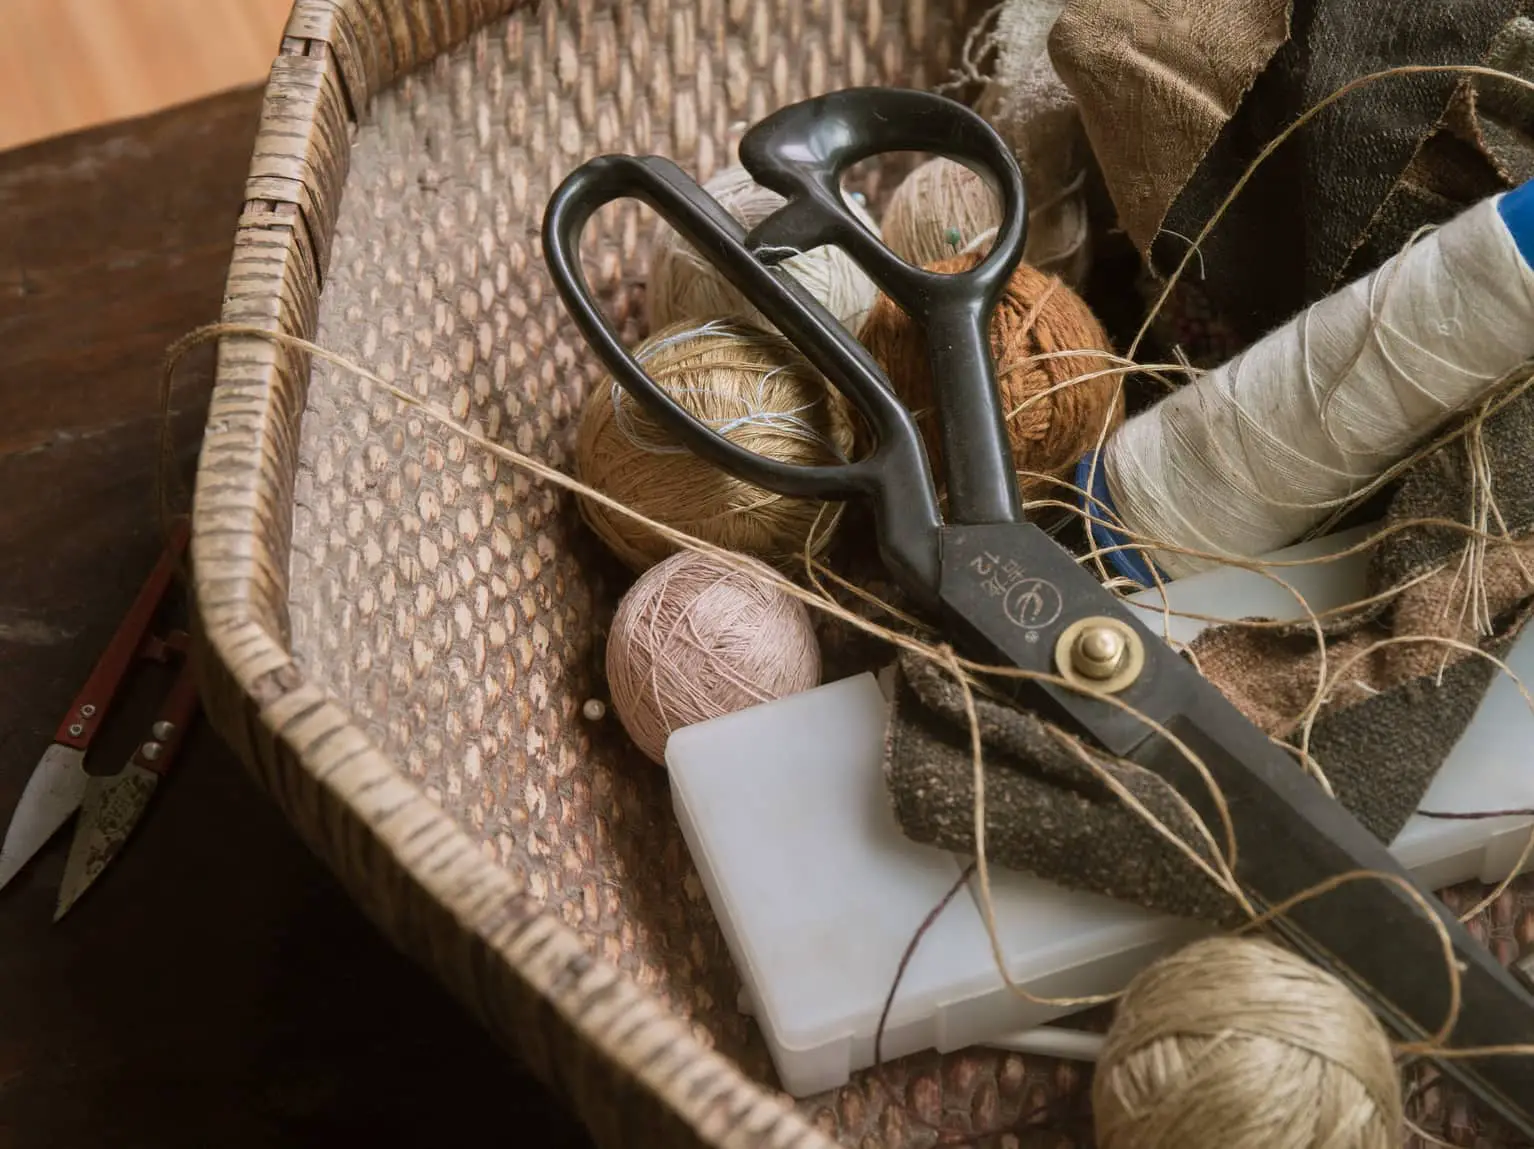 thread and scissors in basket